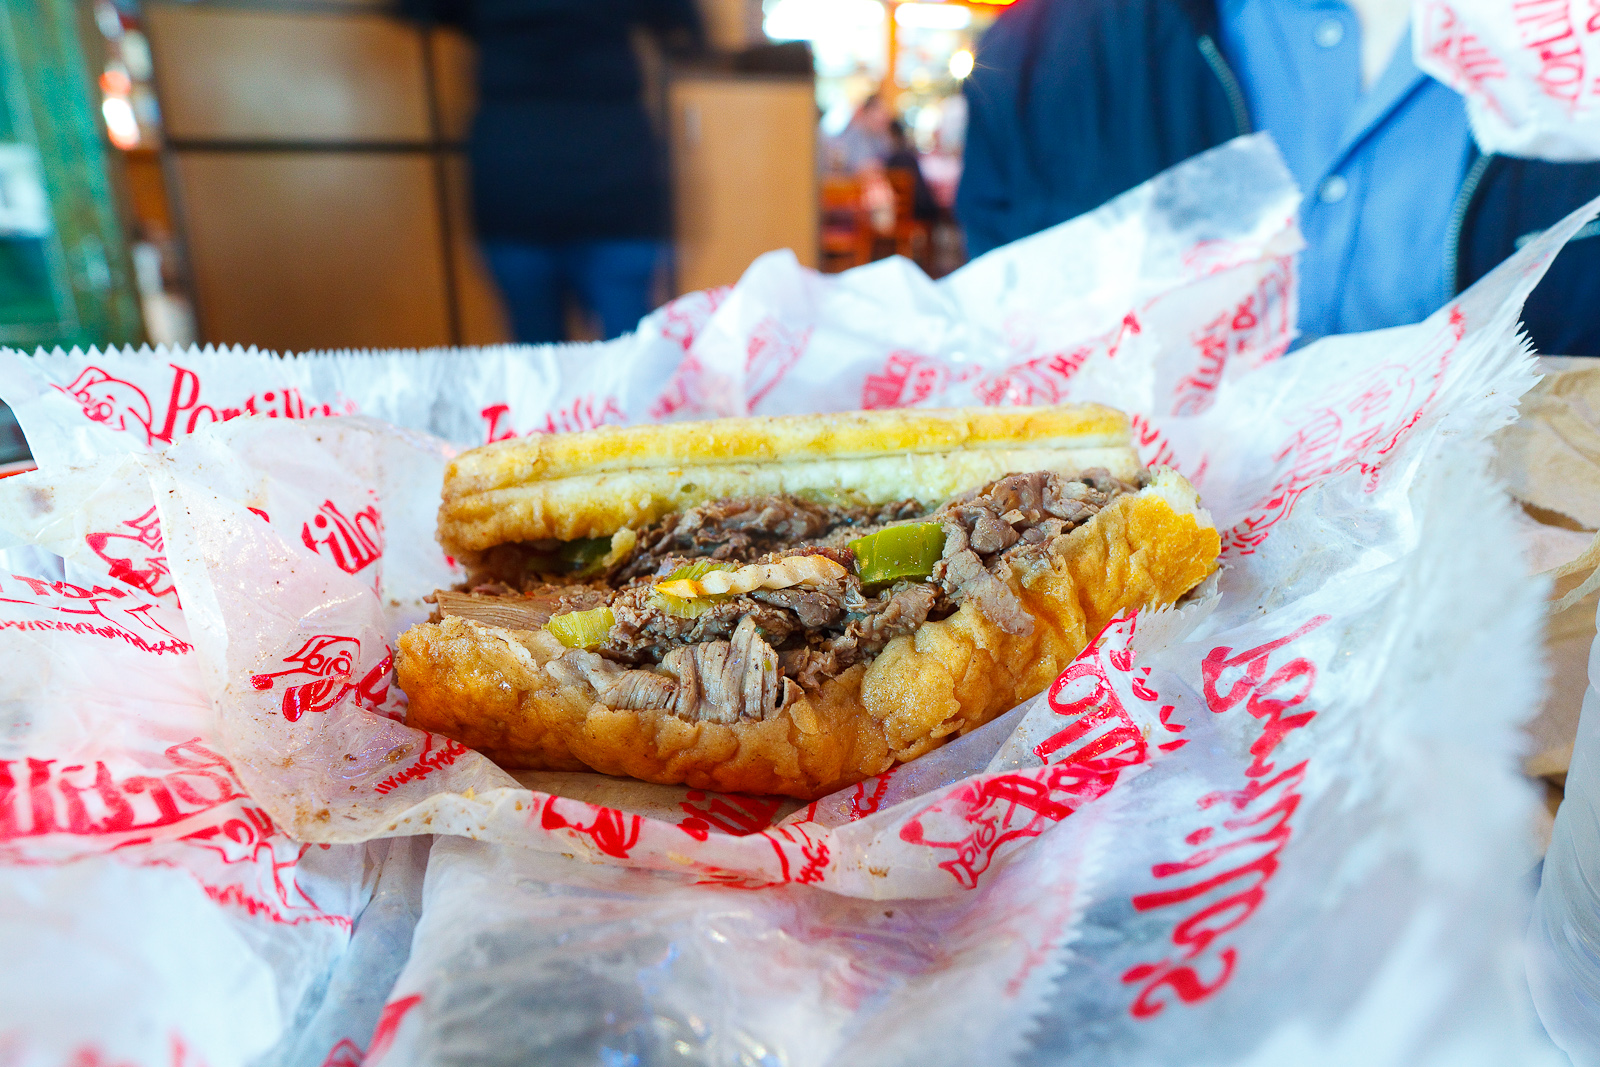 Italian beef sandwich, Chicago’s #1 Italian Beef served on perfectly baked French bread ($4.65)